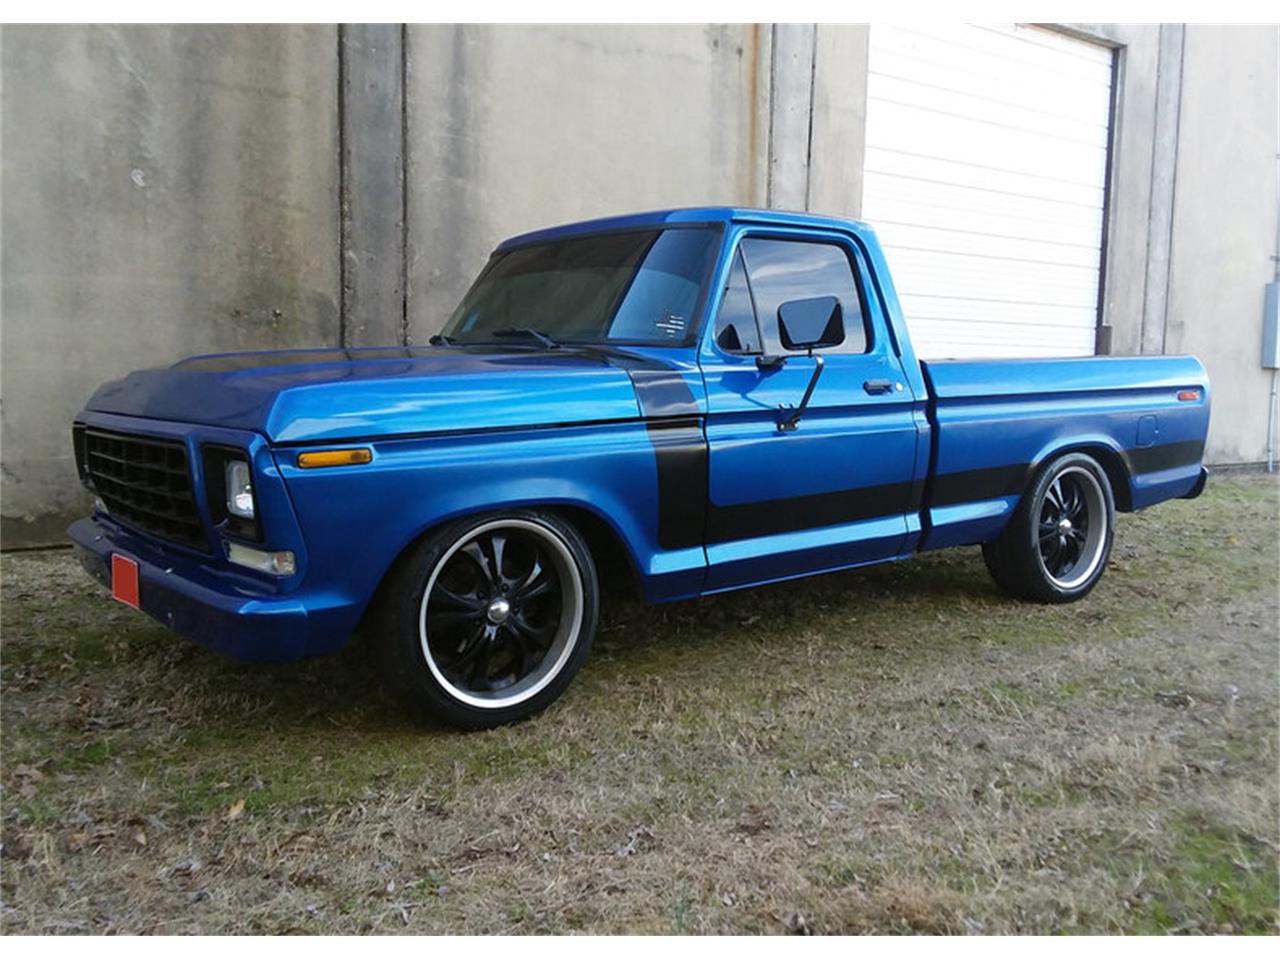 1979 ford f100 for sale classiccars com cc 1066796 1979 ford f100 for sale classiccars